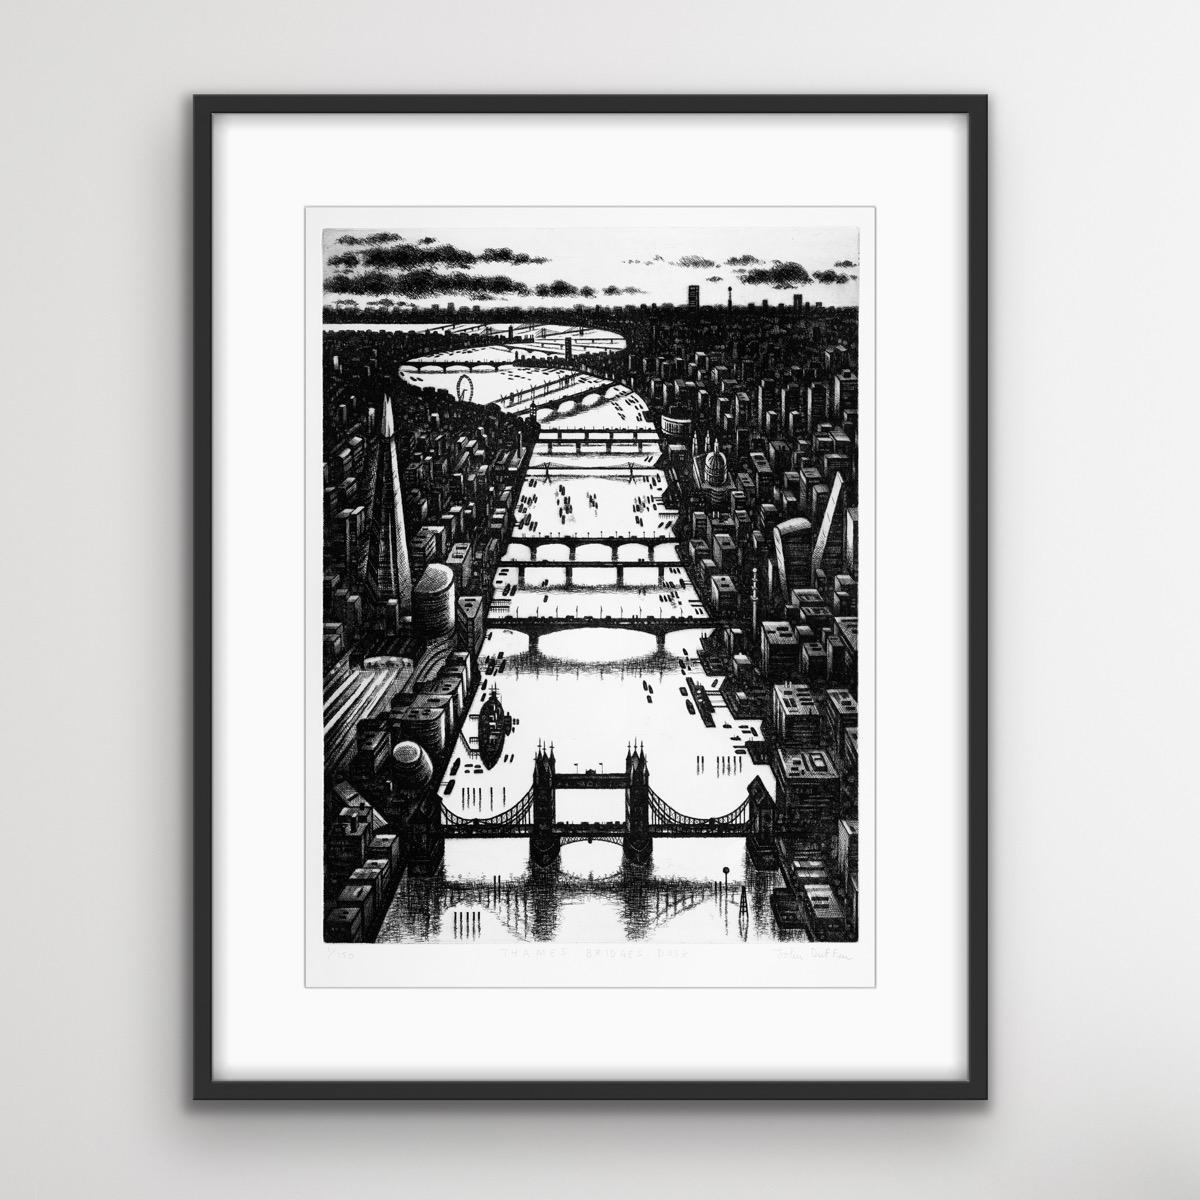 Thames Bridges Dusk is an limited edition cityscape print by John Duffin. The monochromatic colour scheme highlights Duffin’s highly detailed style.
John Duffin is a painter and printmaker whose work is based on the modern environments of cities and